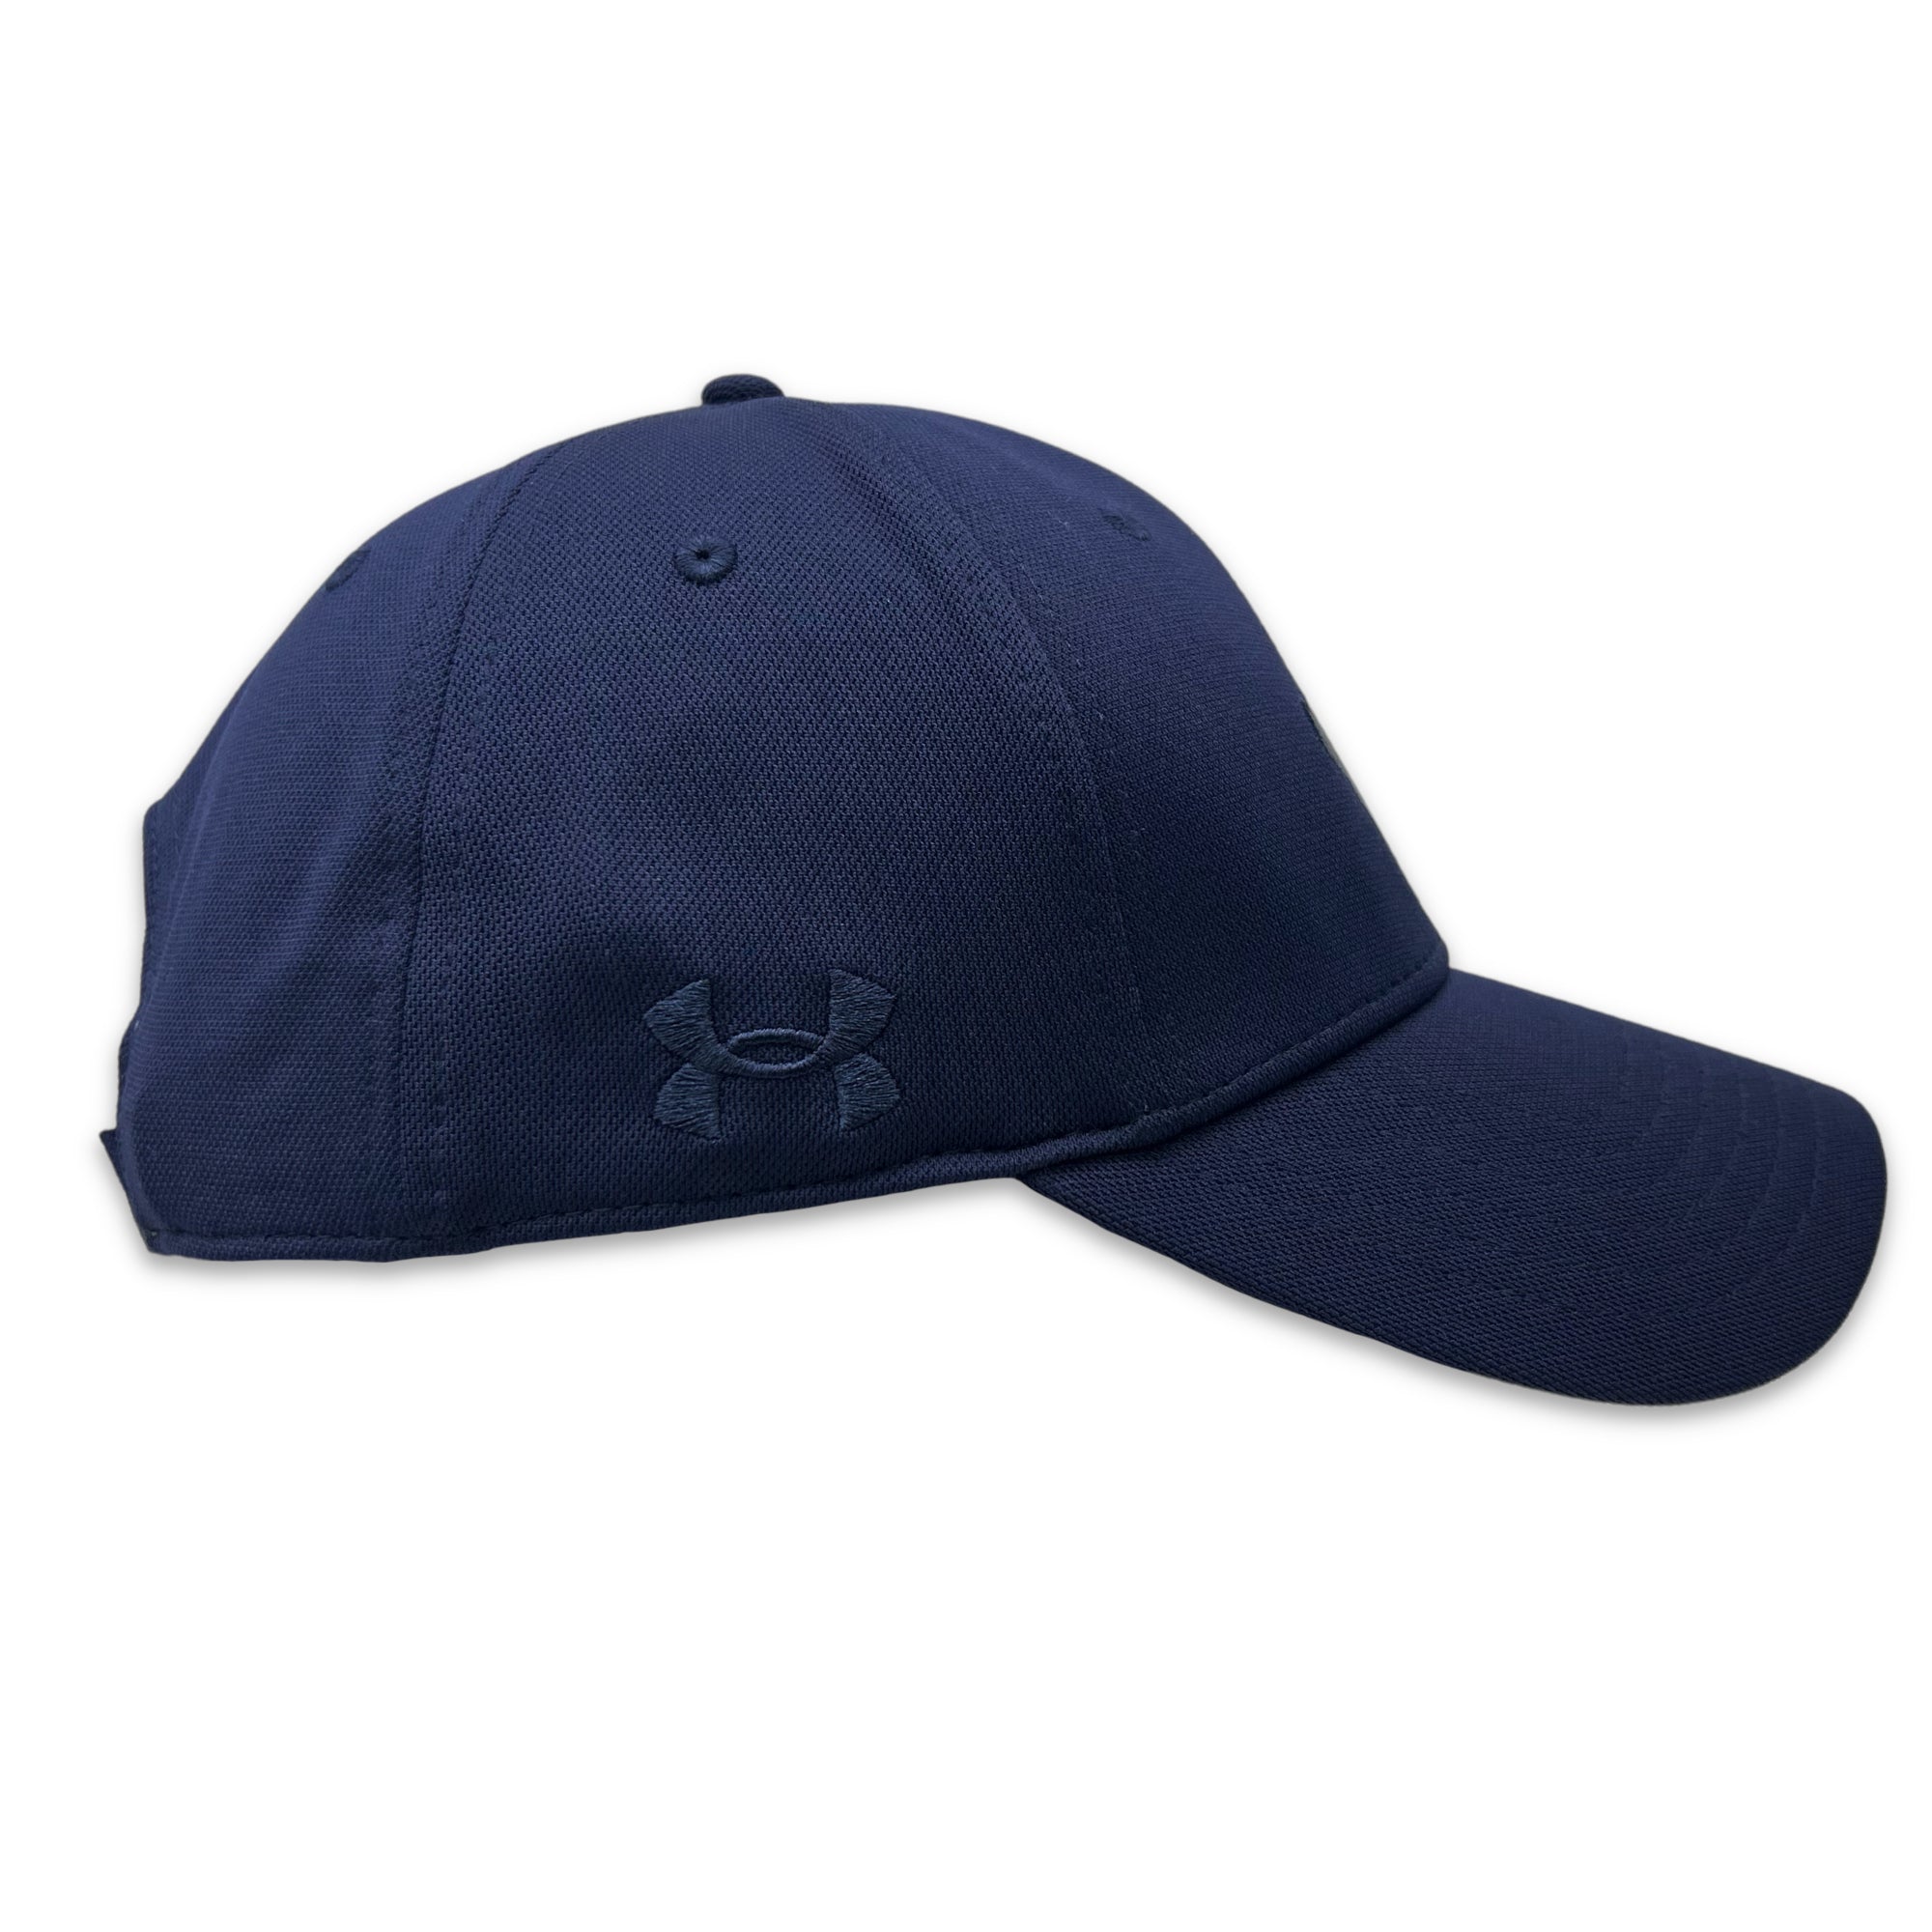 Navy Under Armour 2023 Hat (Navy) Rivalry Blitzing Adjustable